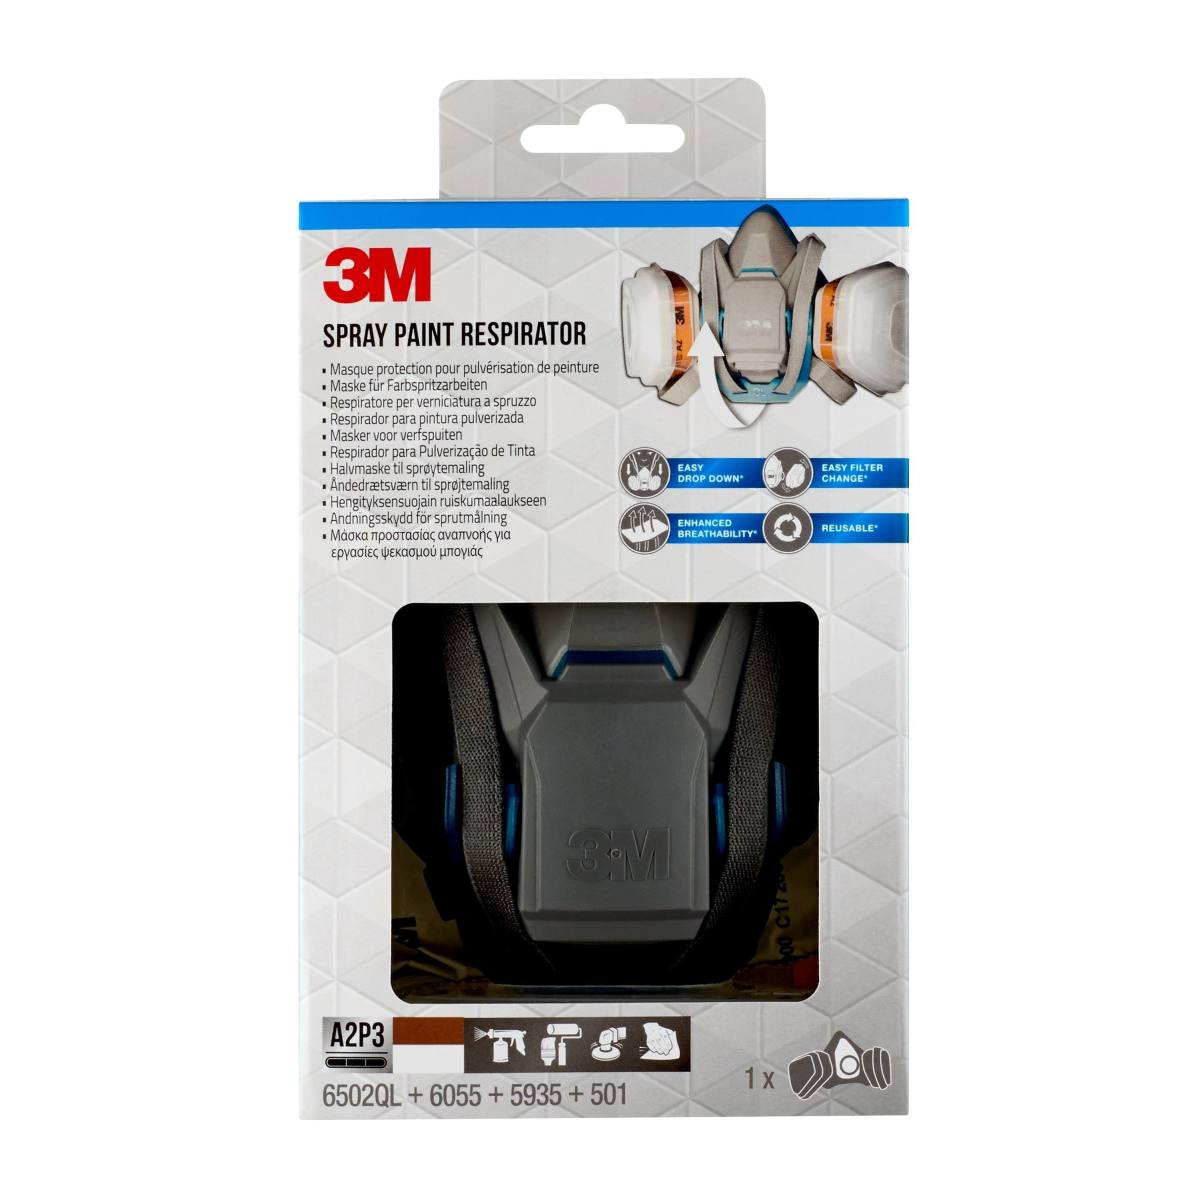 3M Mask for paint spraying 6502QL, A2P3, 1 set